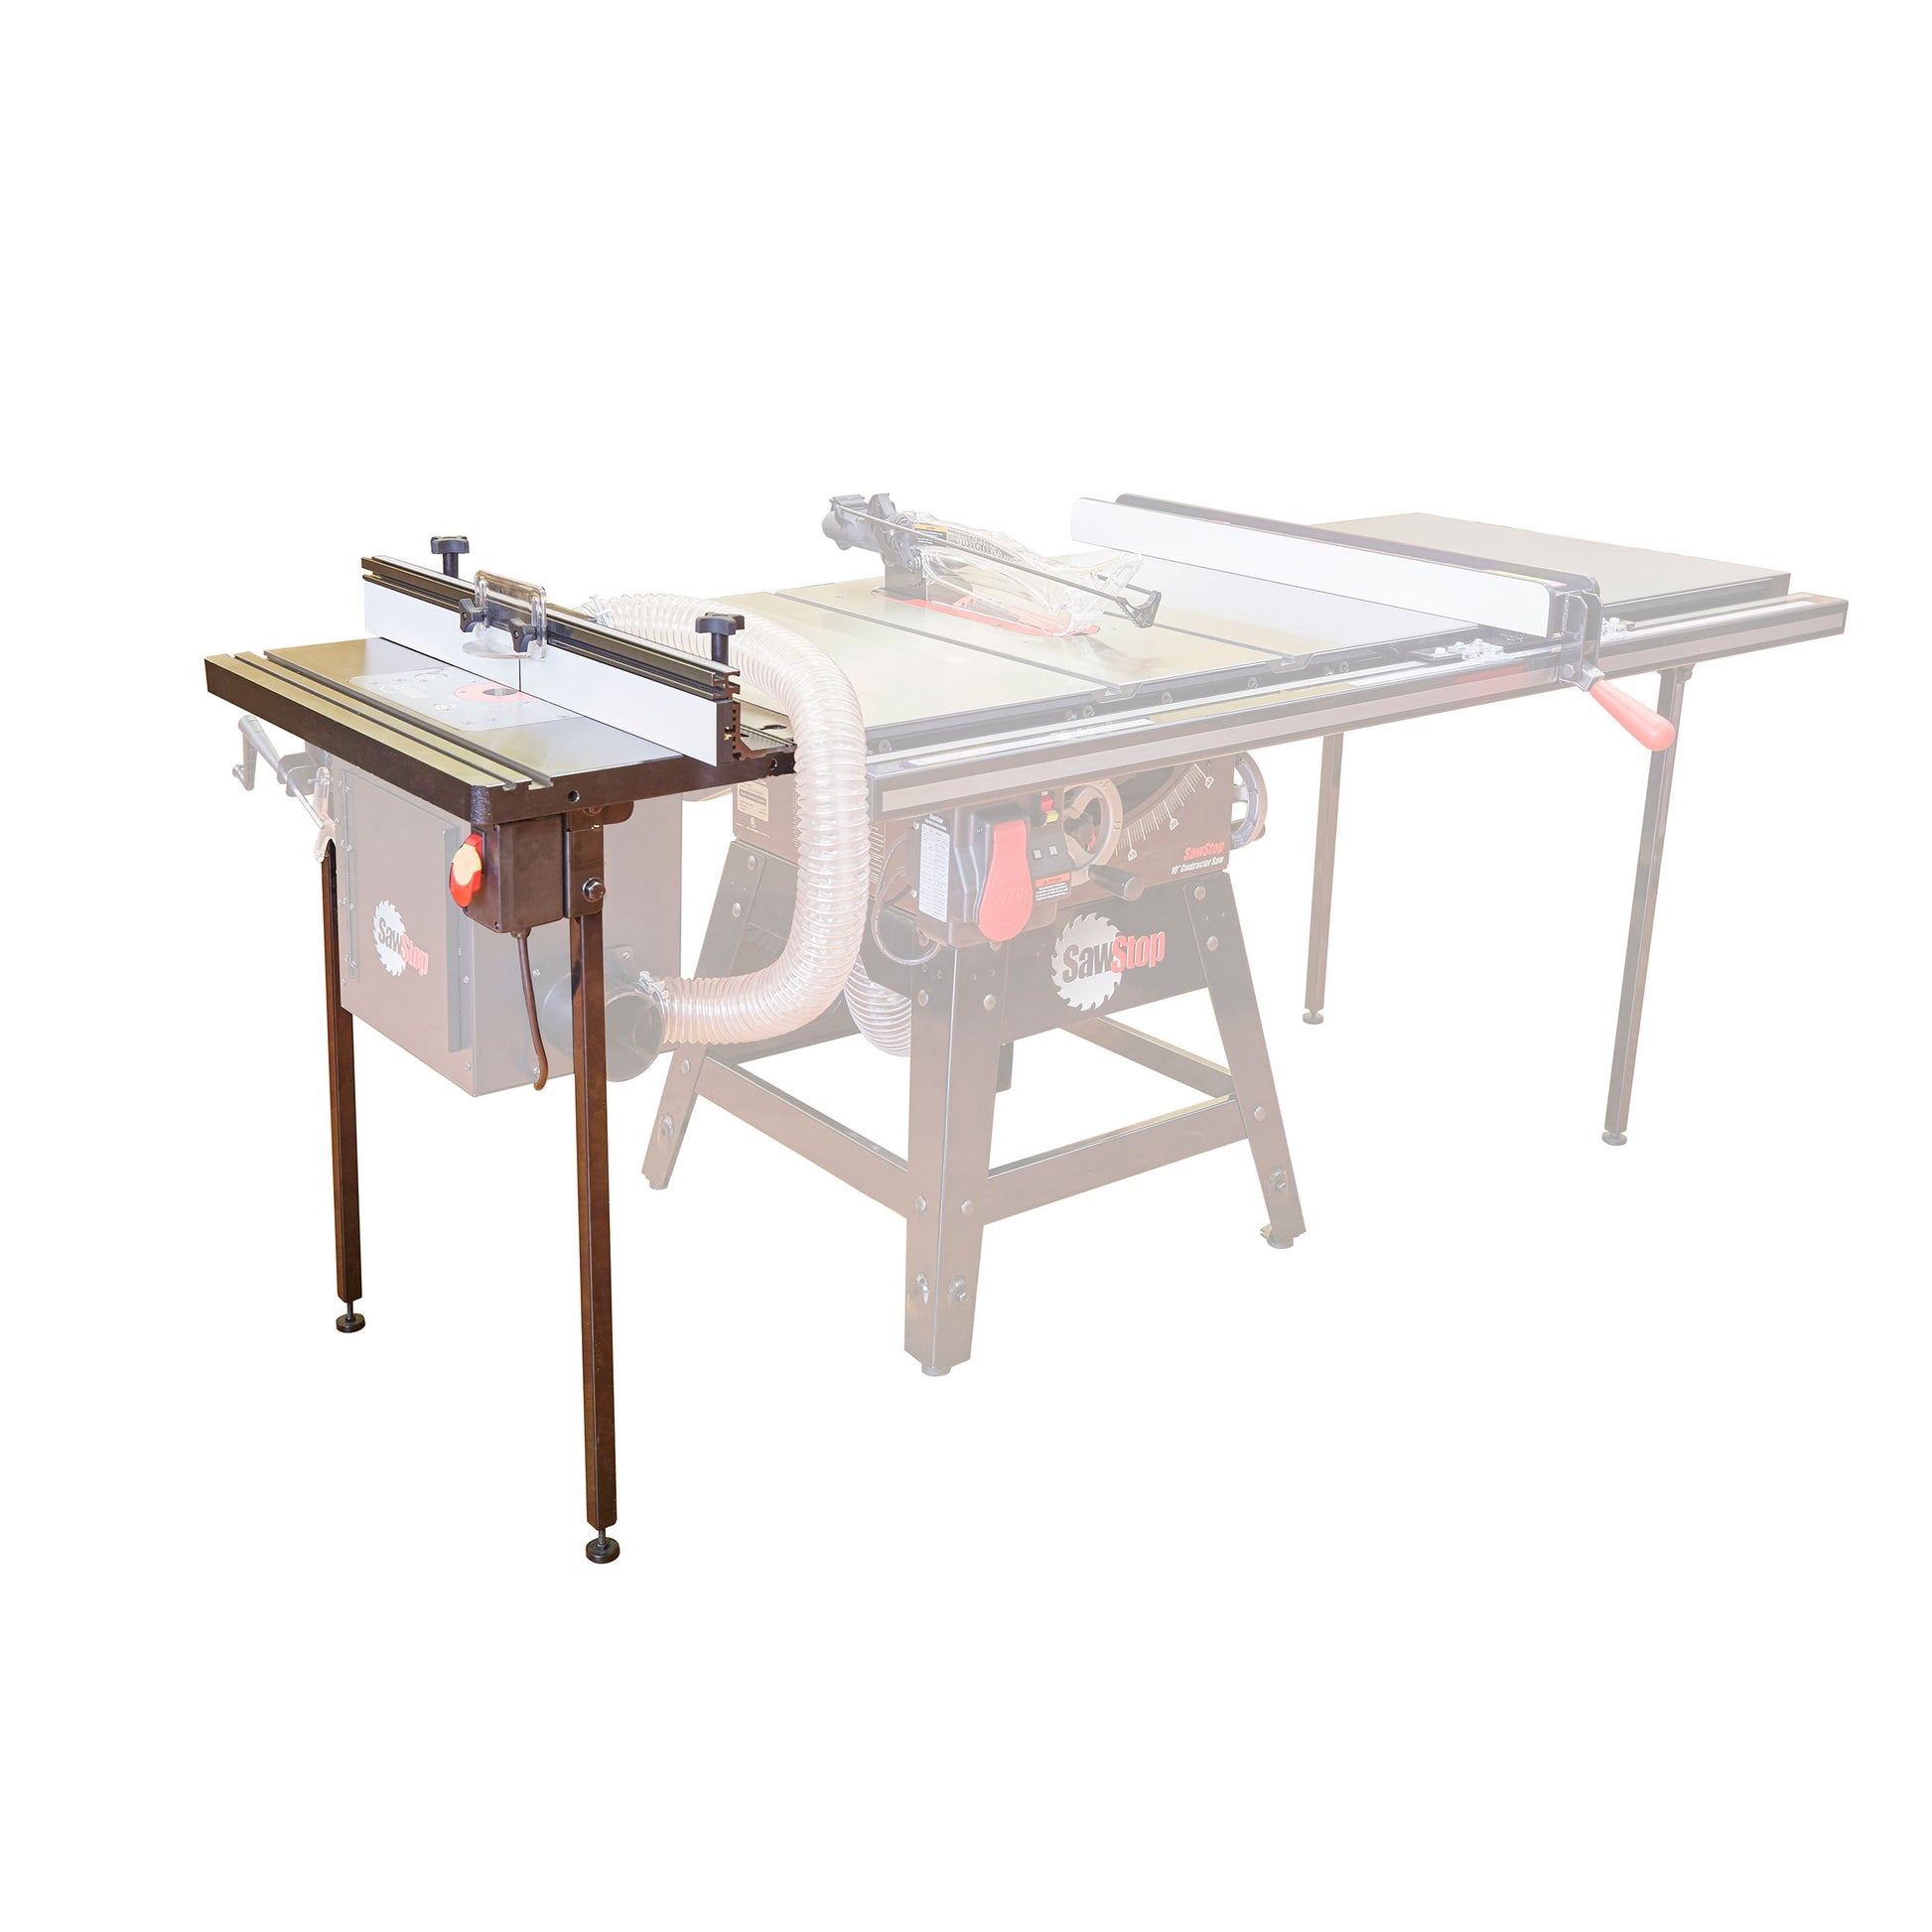 TGP2 27" In-Line Router Table Kit alt 0